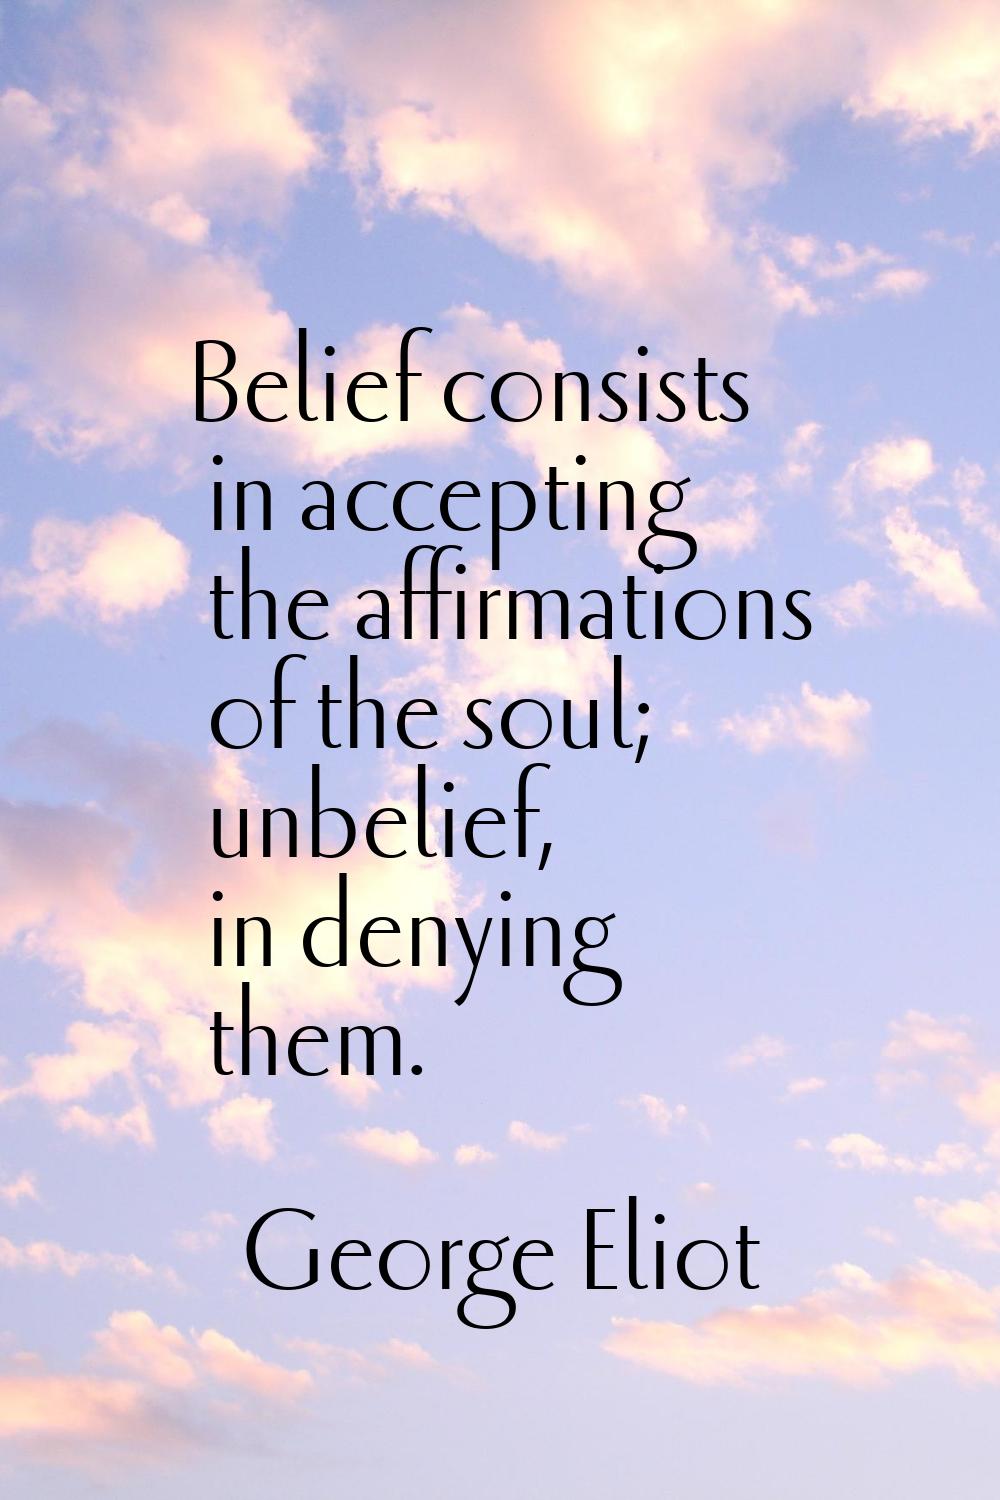 Belief consists in accepting the affirmations of the soul; unbelief, in denying them.